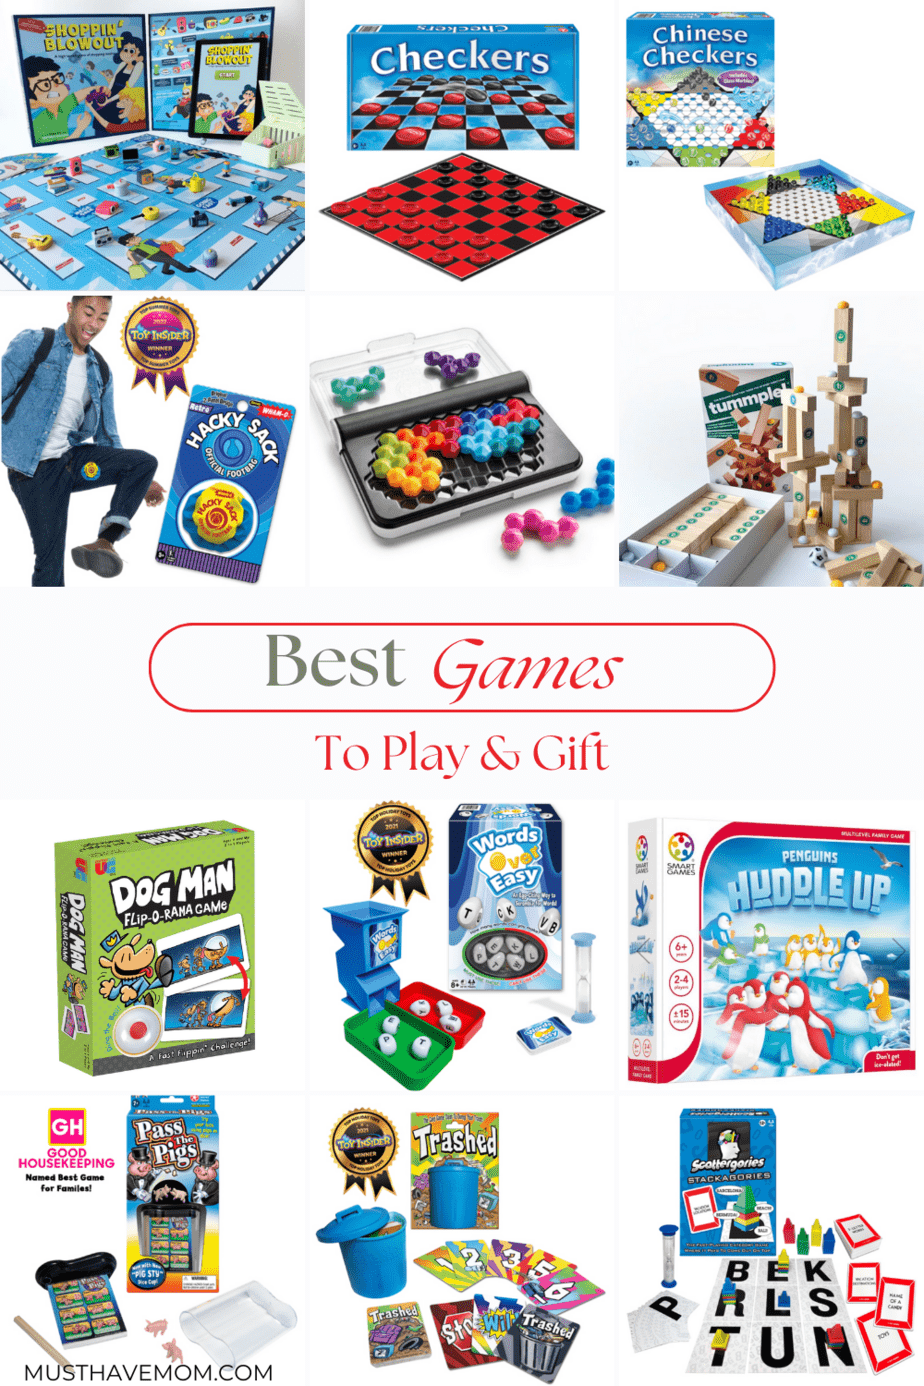 Best Board Games To Gift